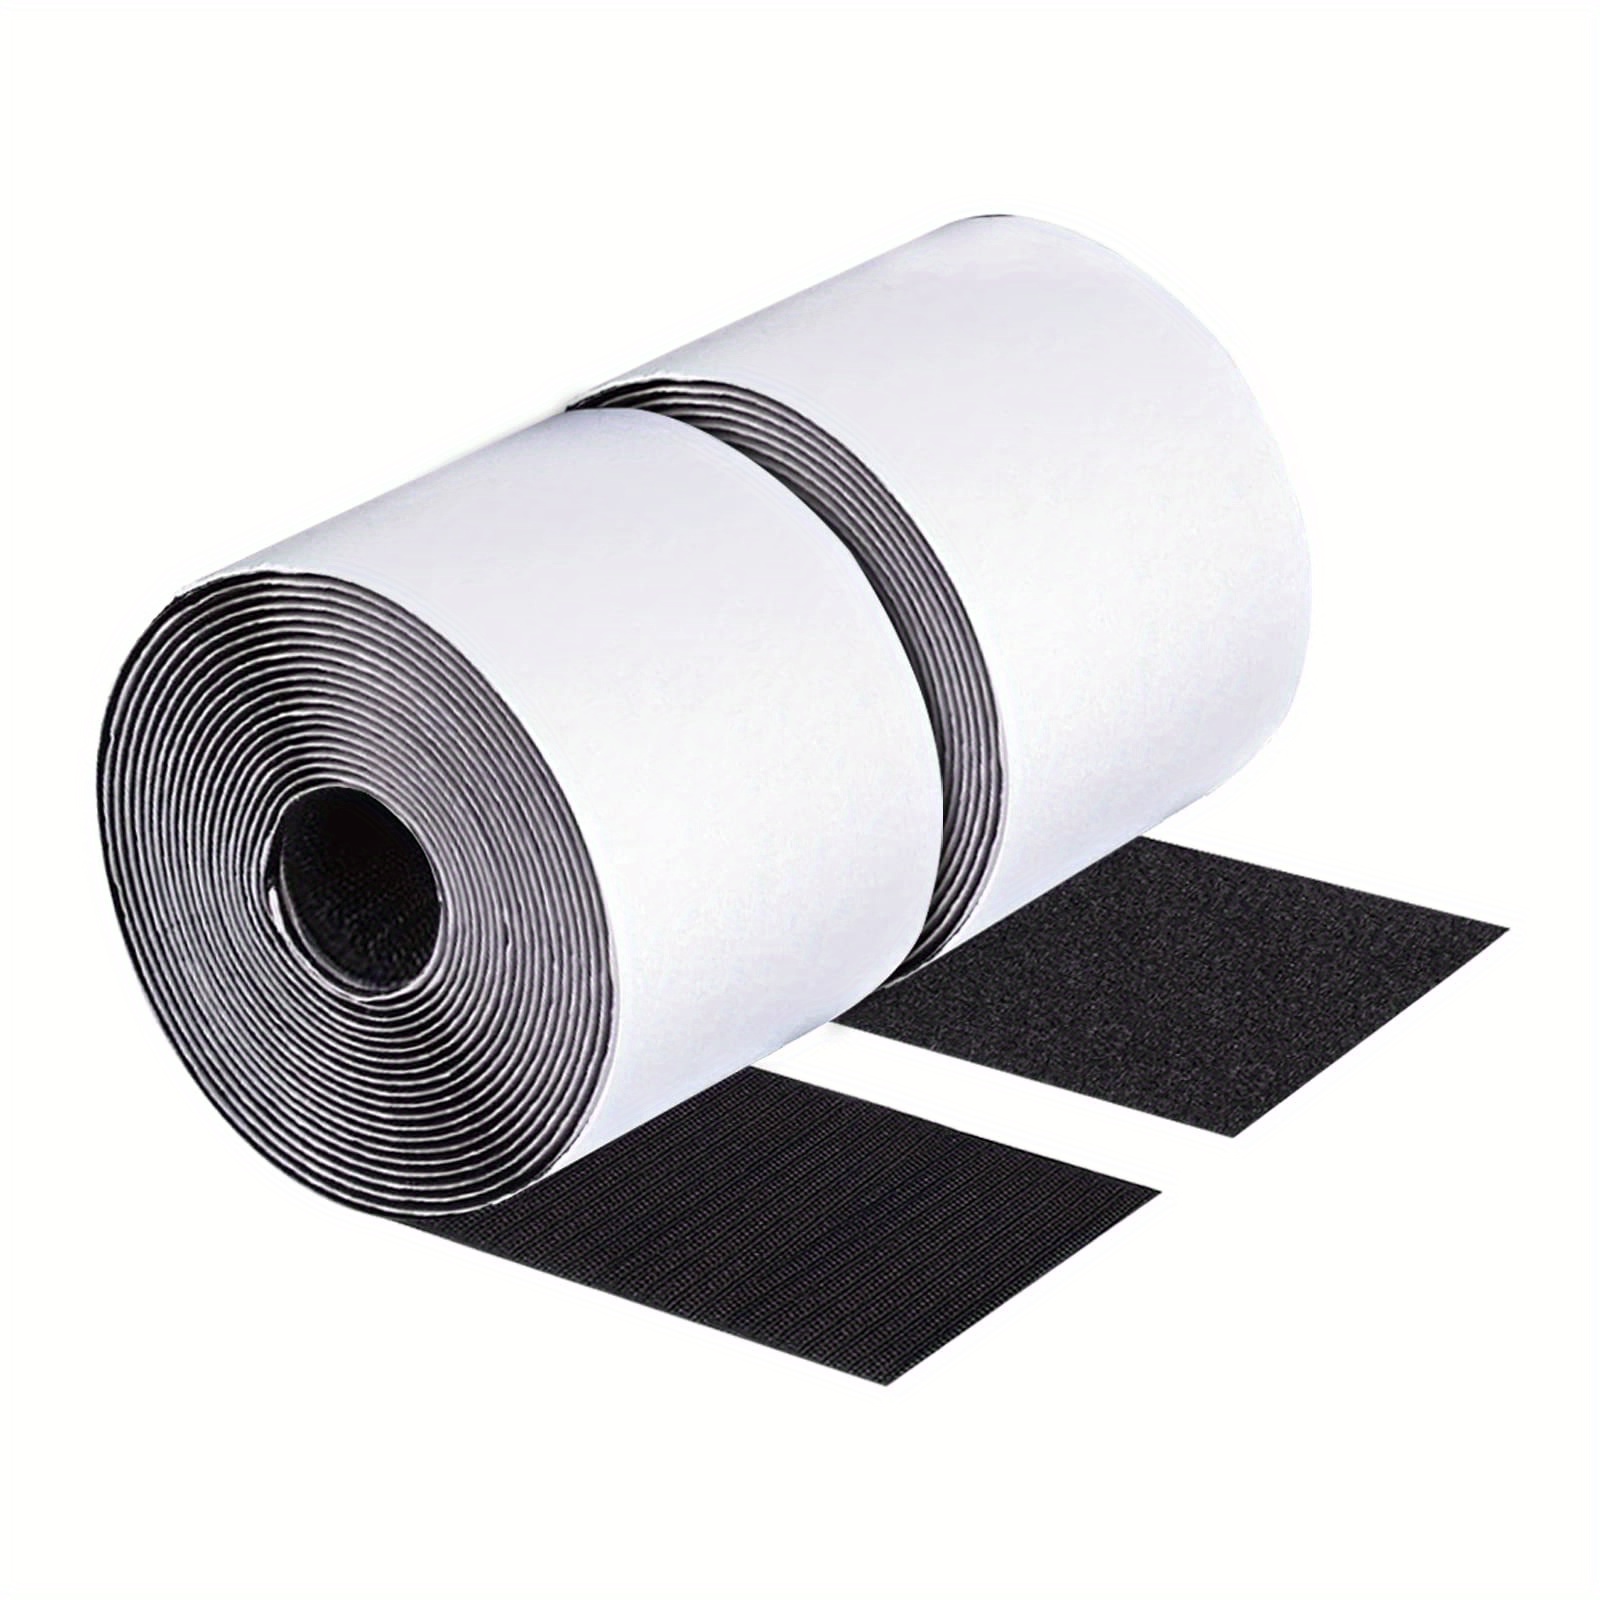 Couch Cushion Non Slip Pads to Keep Couch Cushions from Sliding, Hook and  Loop Tape with Adhesive for Smooth Surfaces